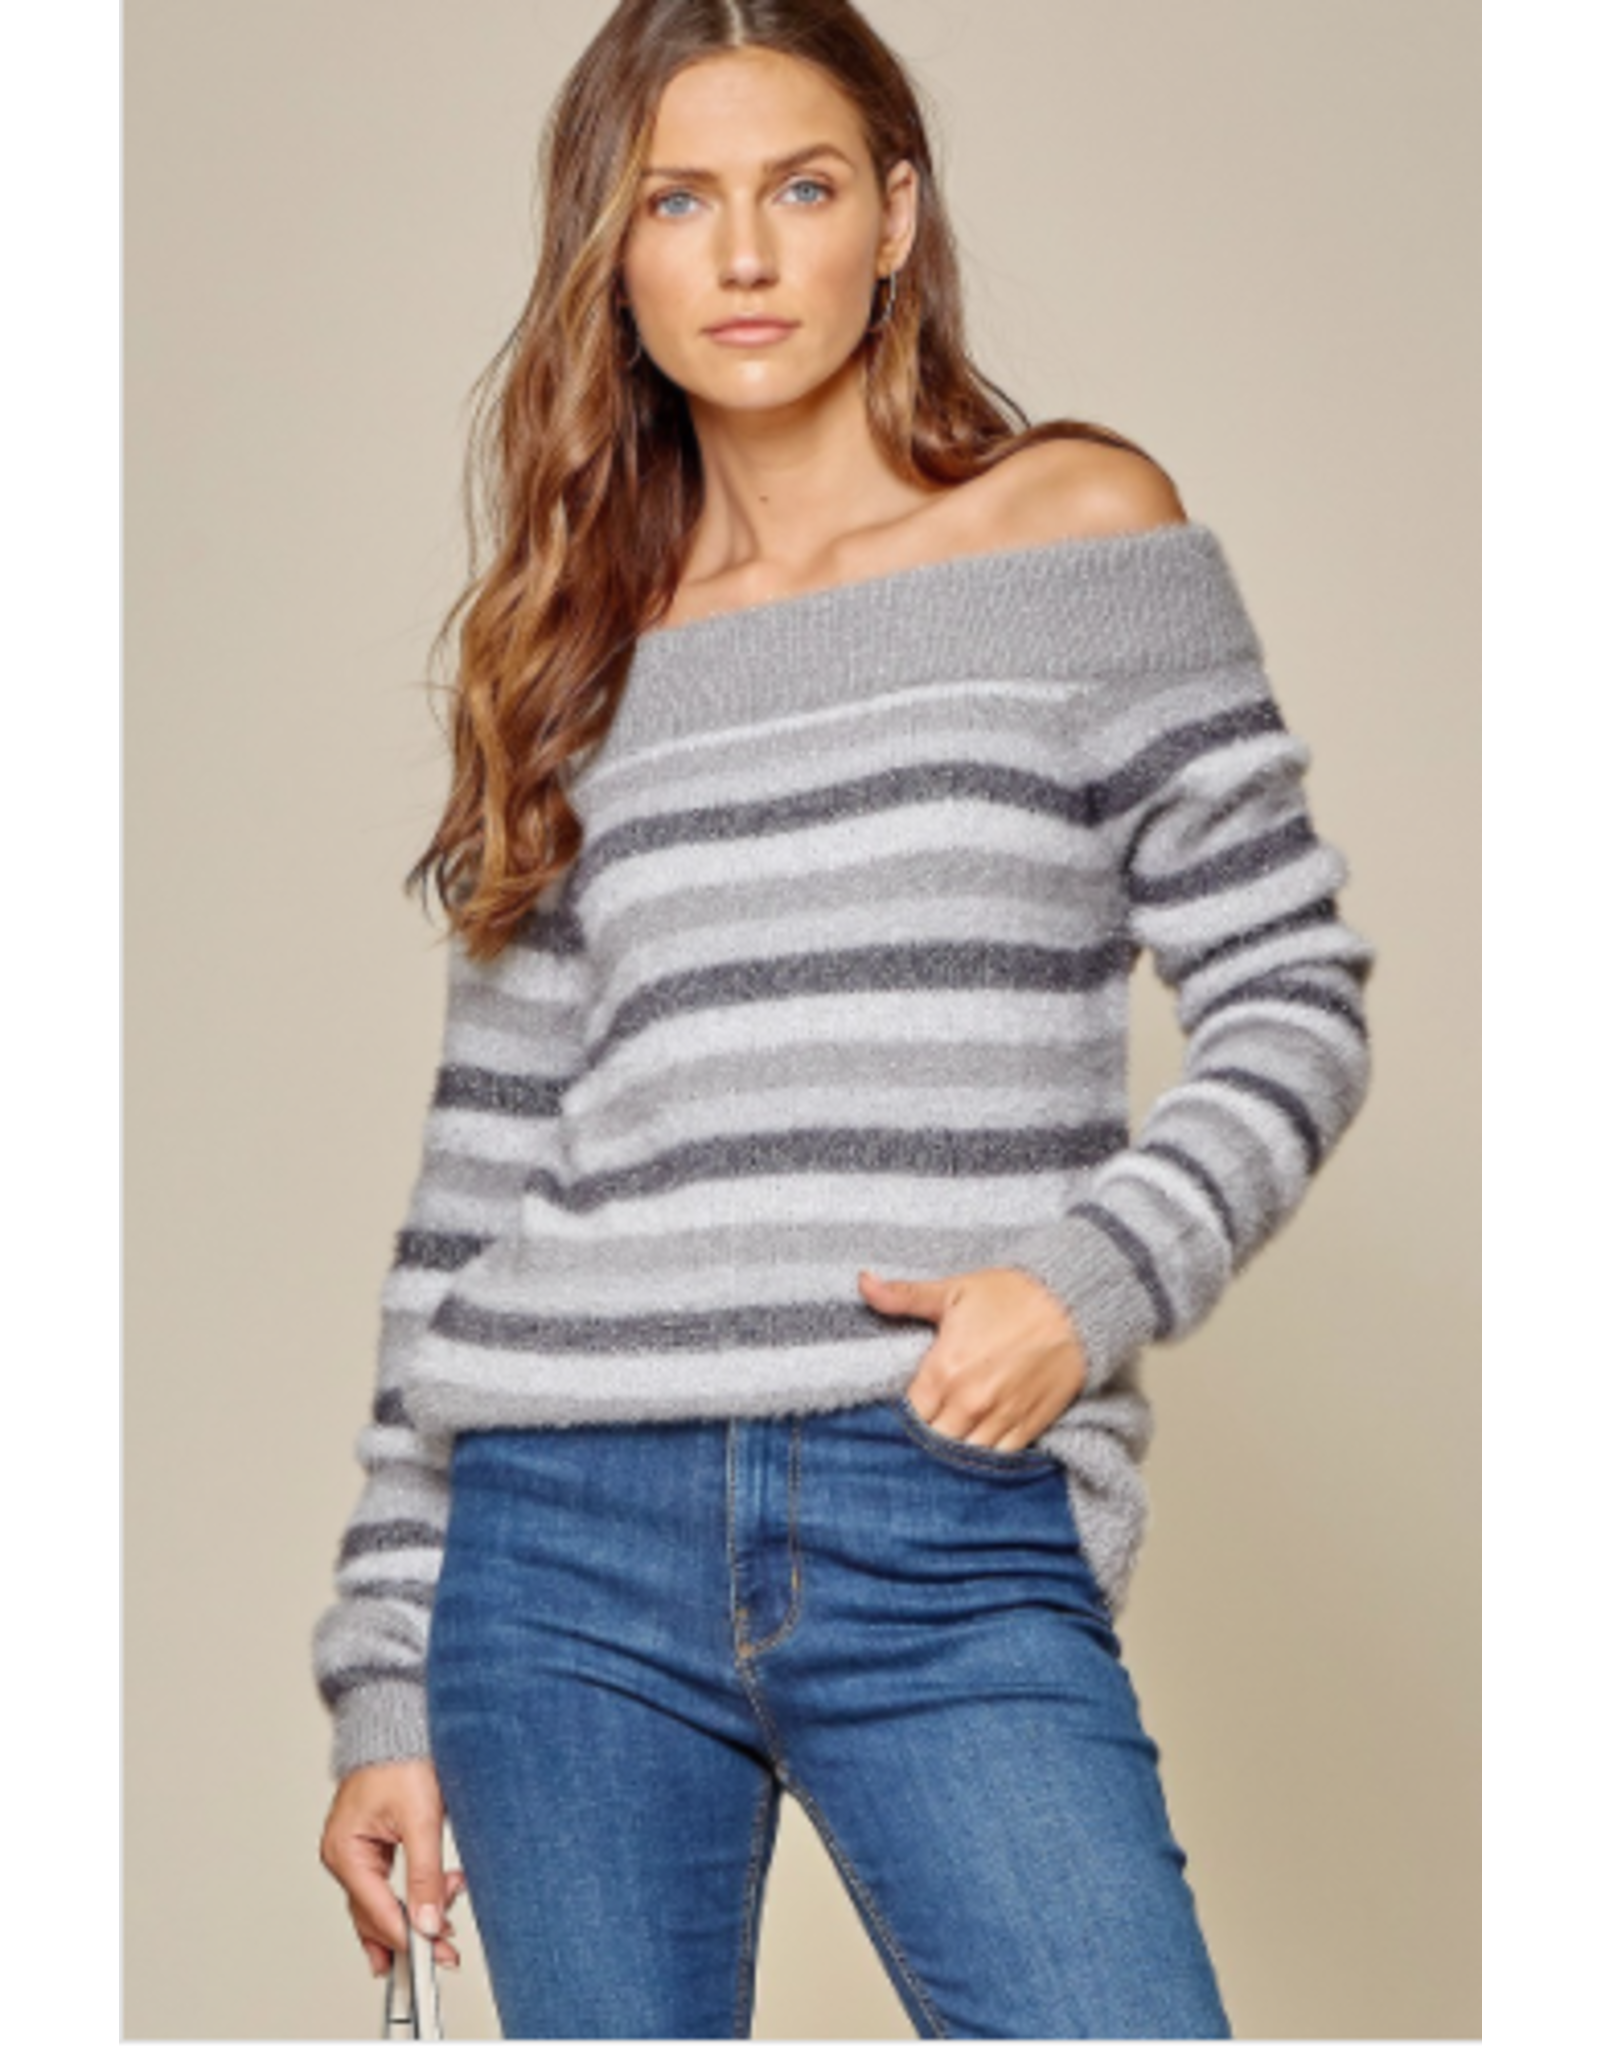 Monroe - Striped off the shoulder sweater